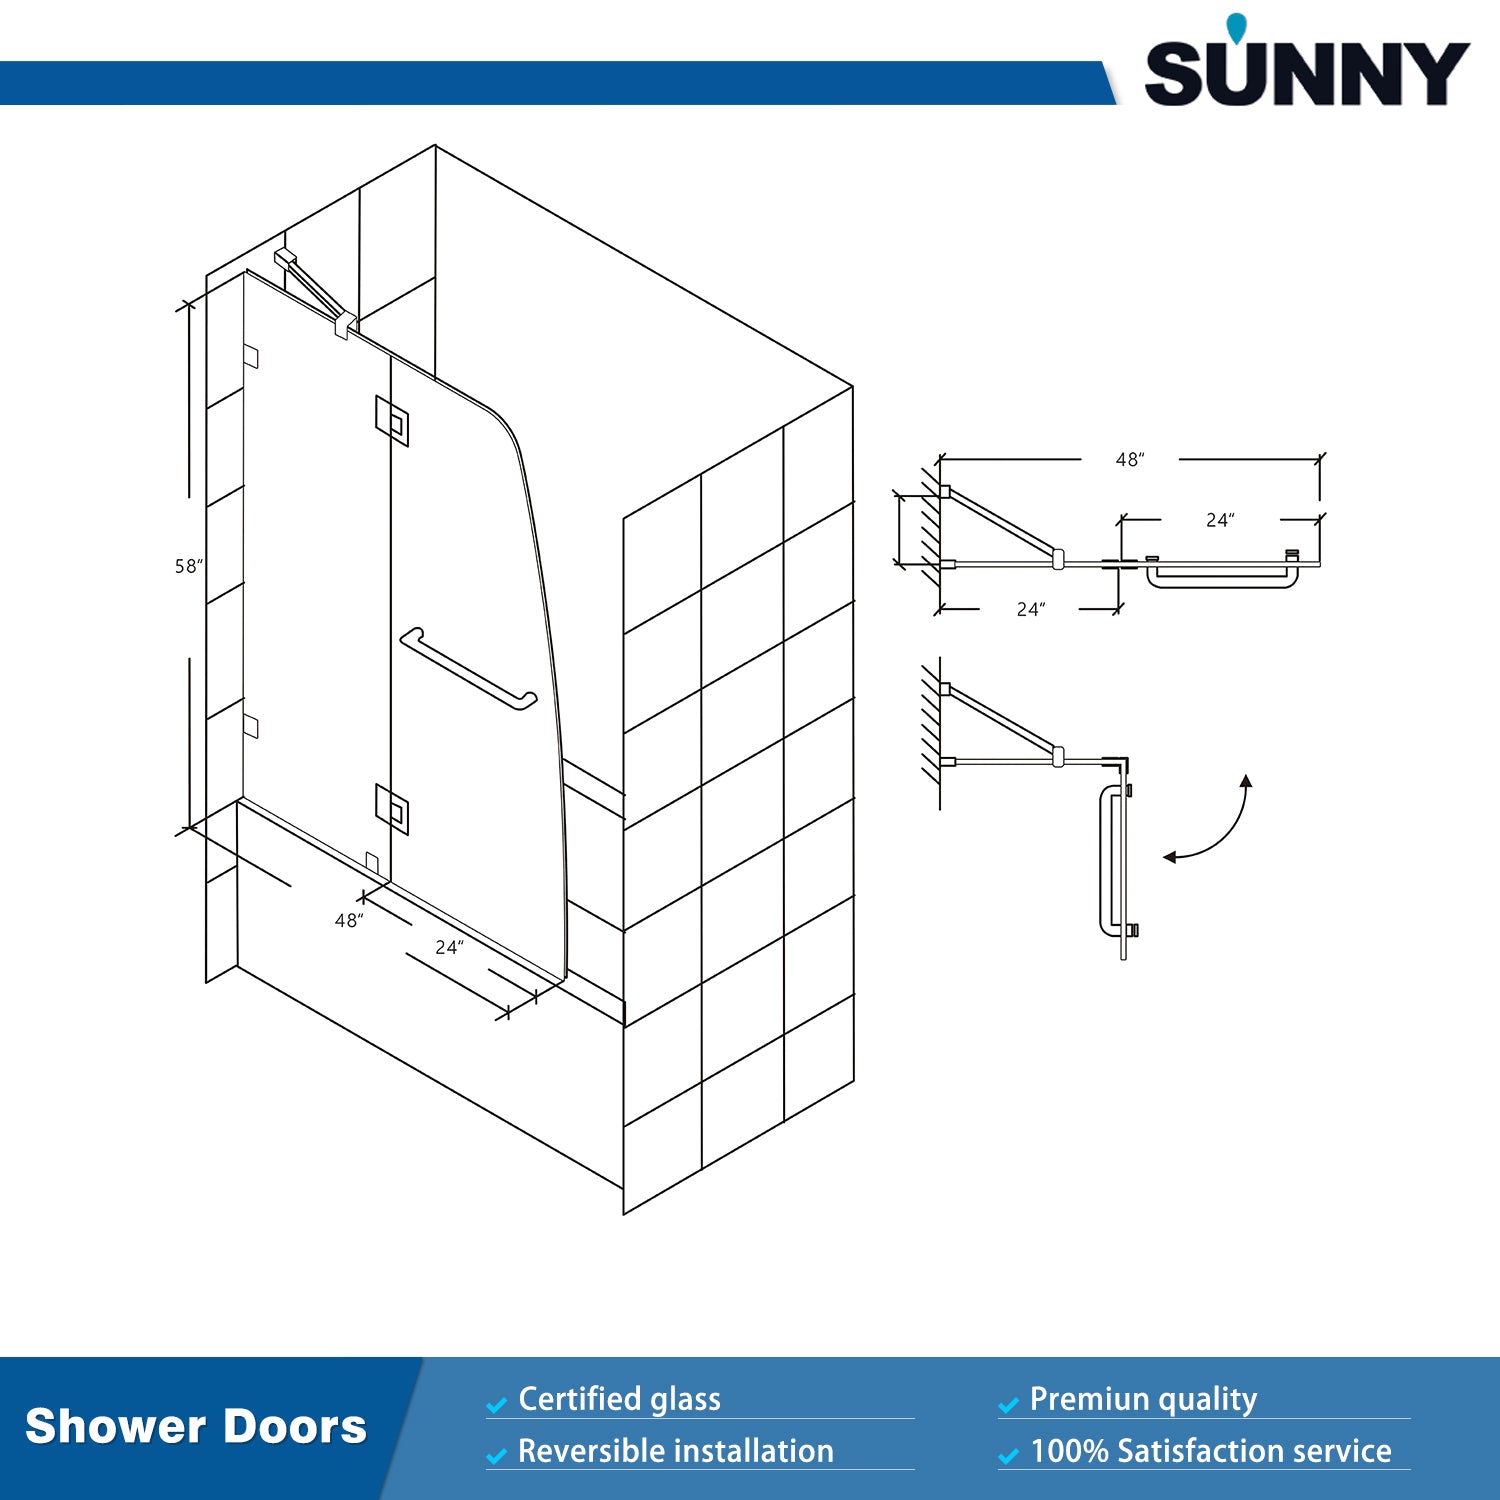 SUNNY SHOWER 48 in. W x 58 in. H Frameless Chrome Finish Bathtub Hinged Door Size Chart